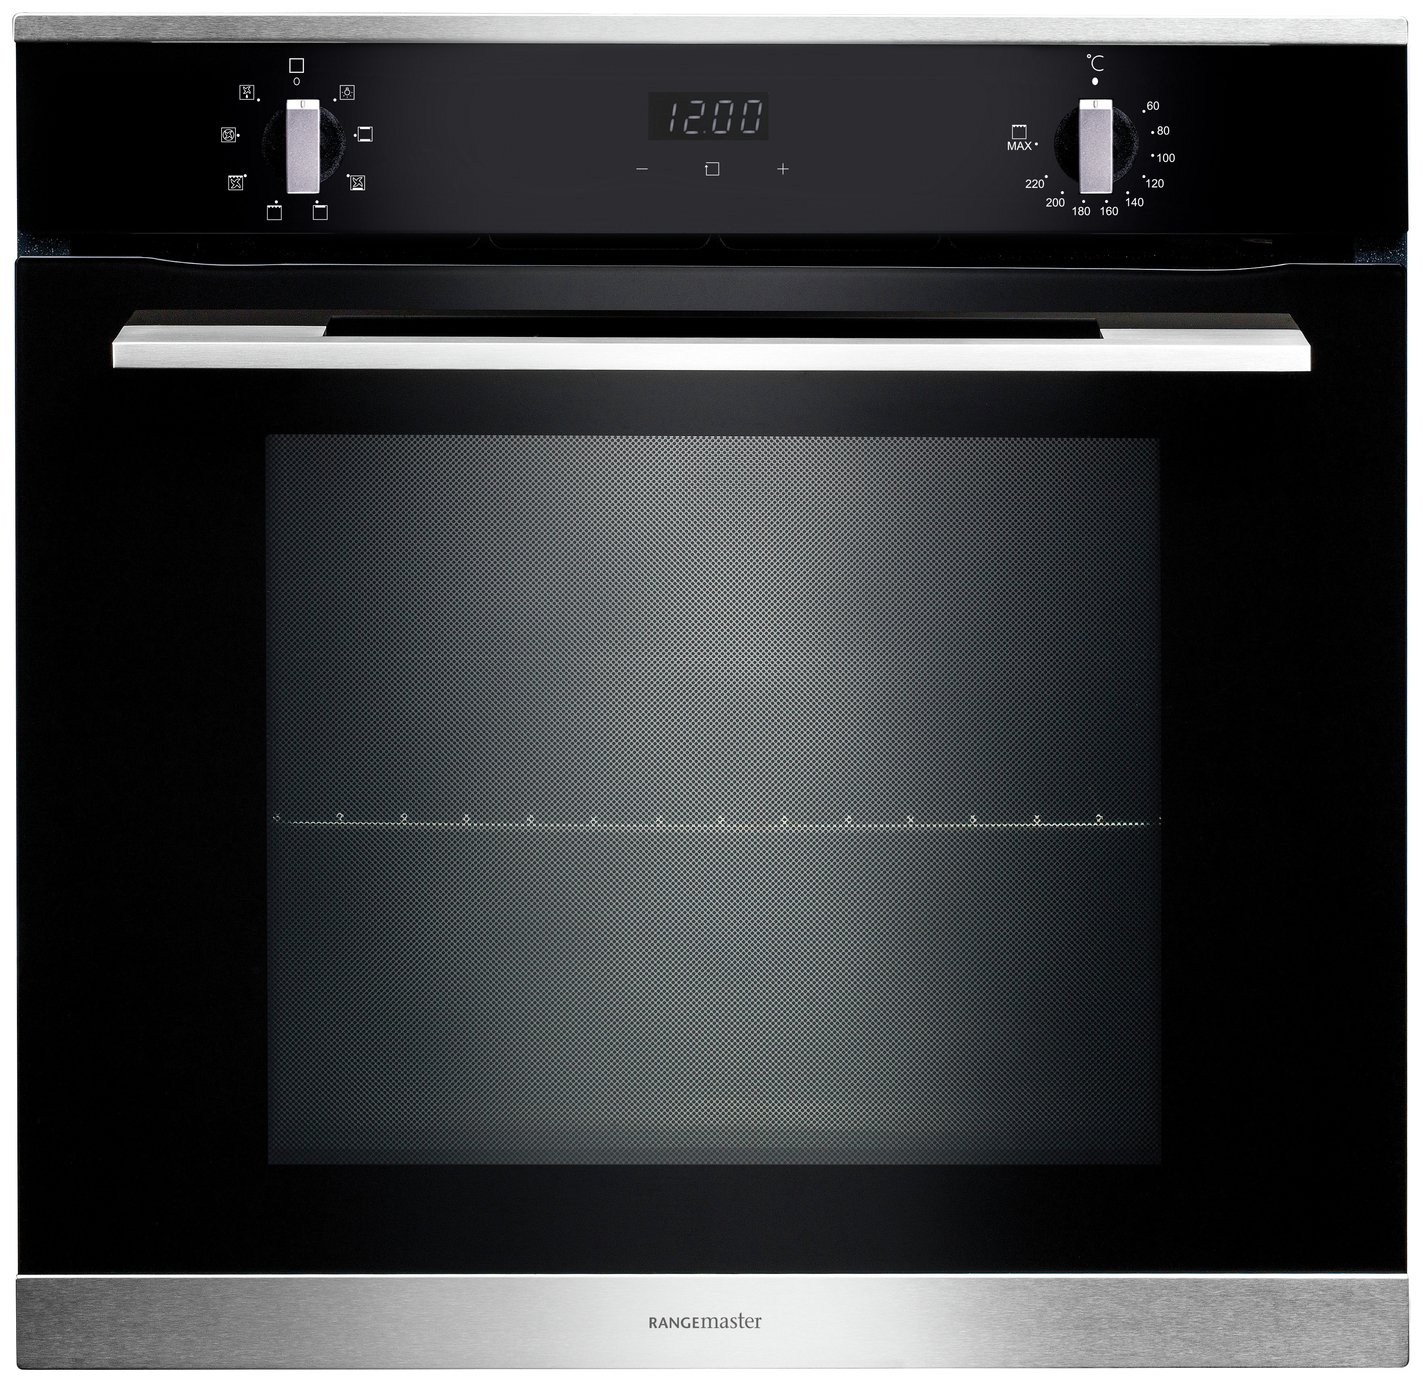 Rangemaster RMB608BL/SS Built In Electric Oven - Black